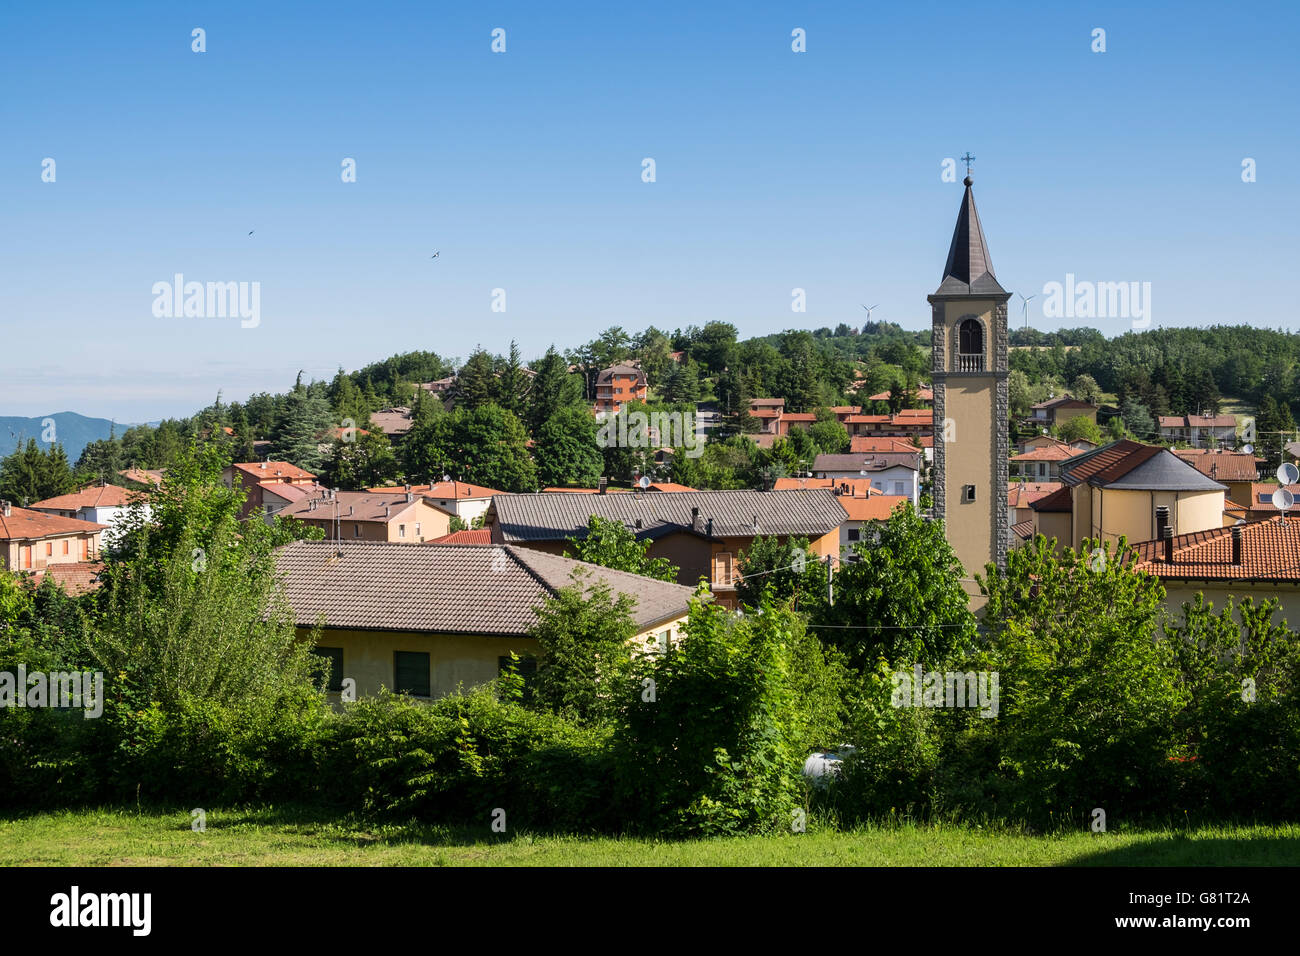 Views over the village of Madonna dei Fornelli in the Appenine hils of Italy. Stock Photo